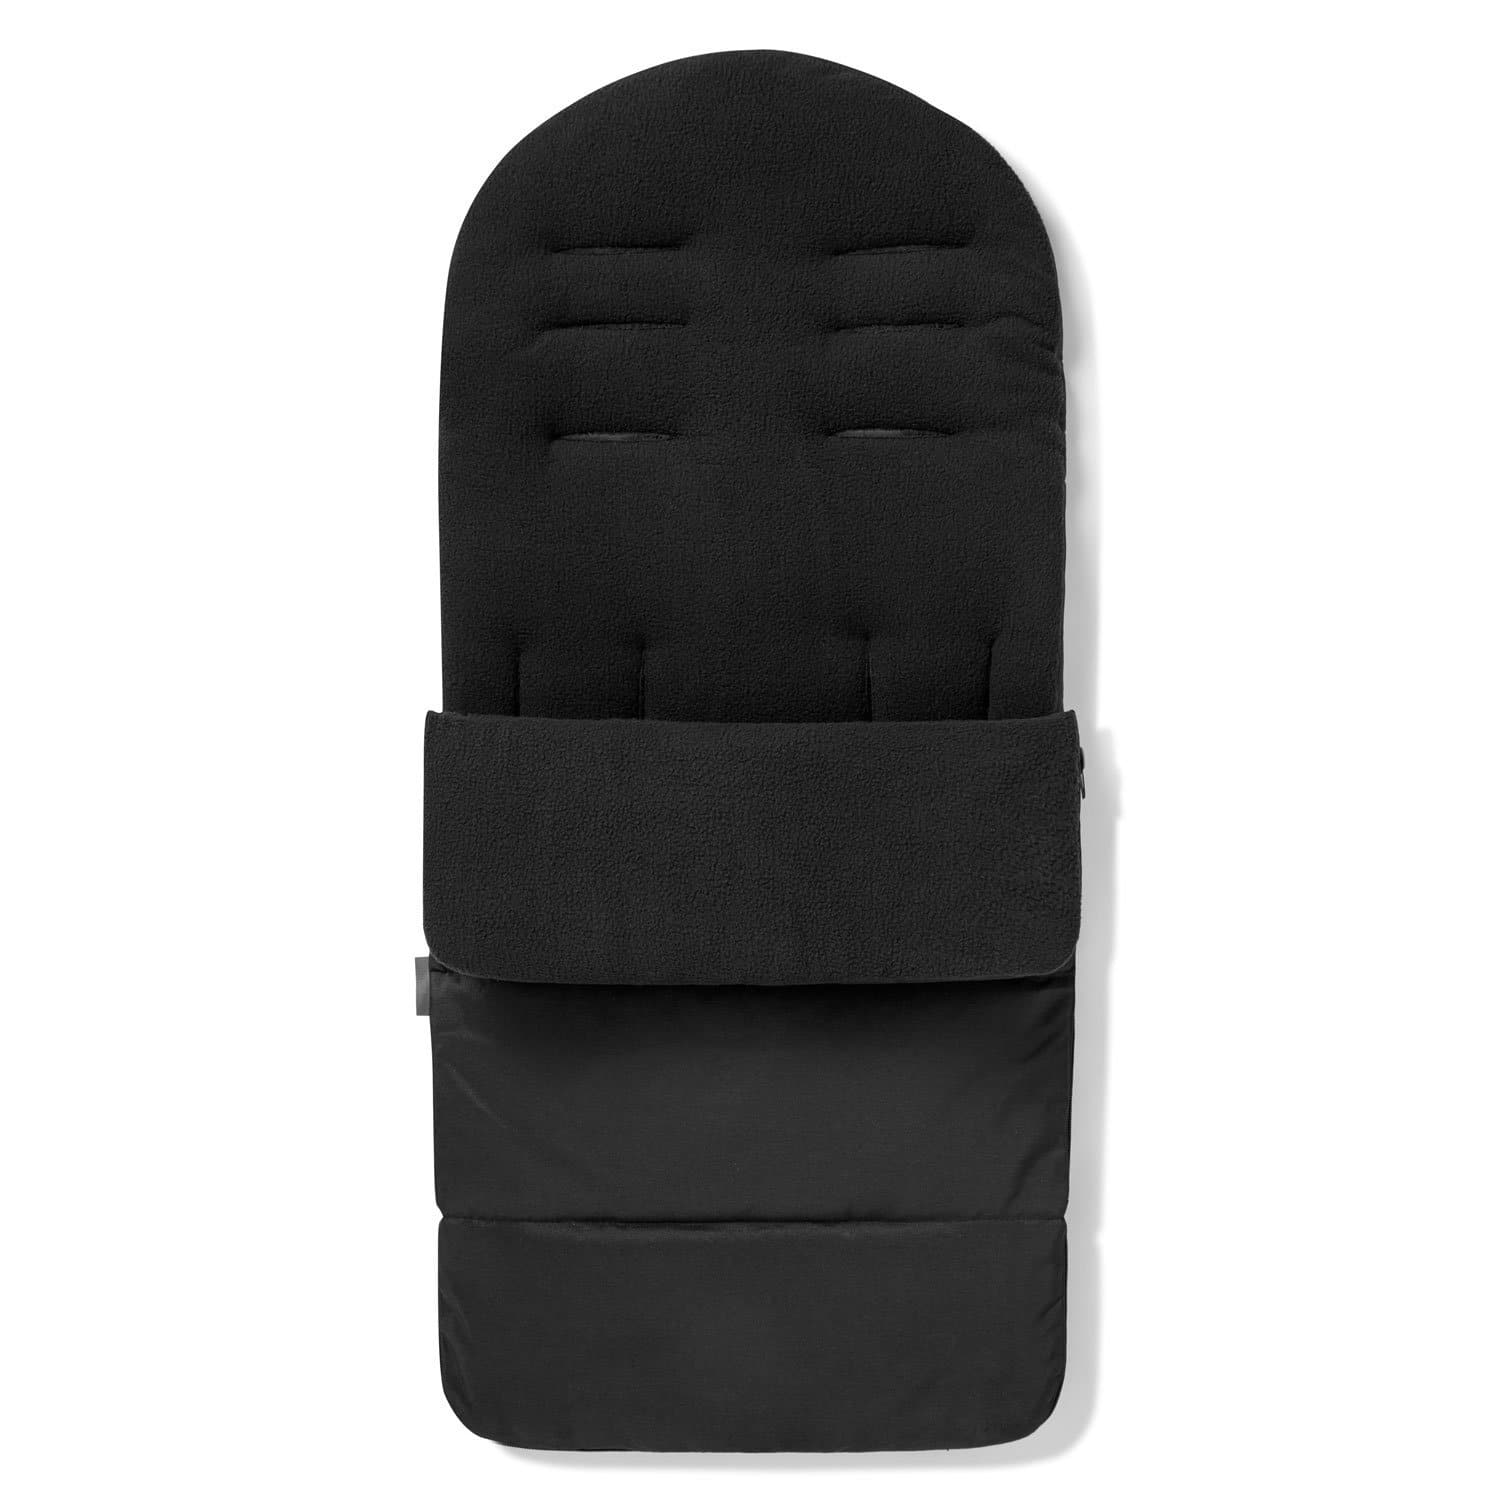 Premium Footmuff / Cosy Toes Compatible with Bugaboo - Black Jack / Fits All Models | For Your Little One